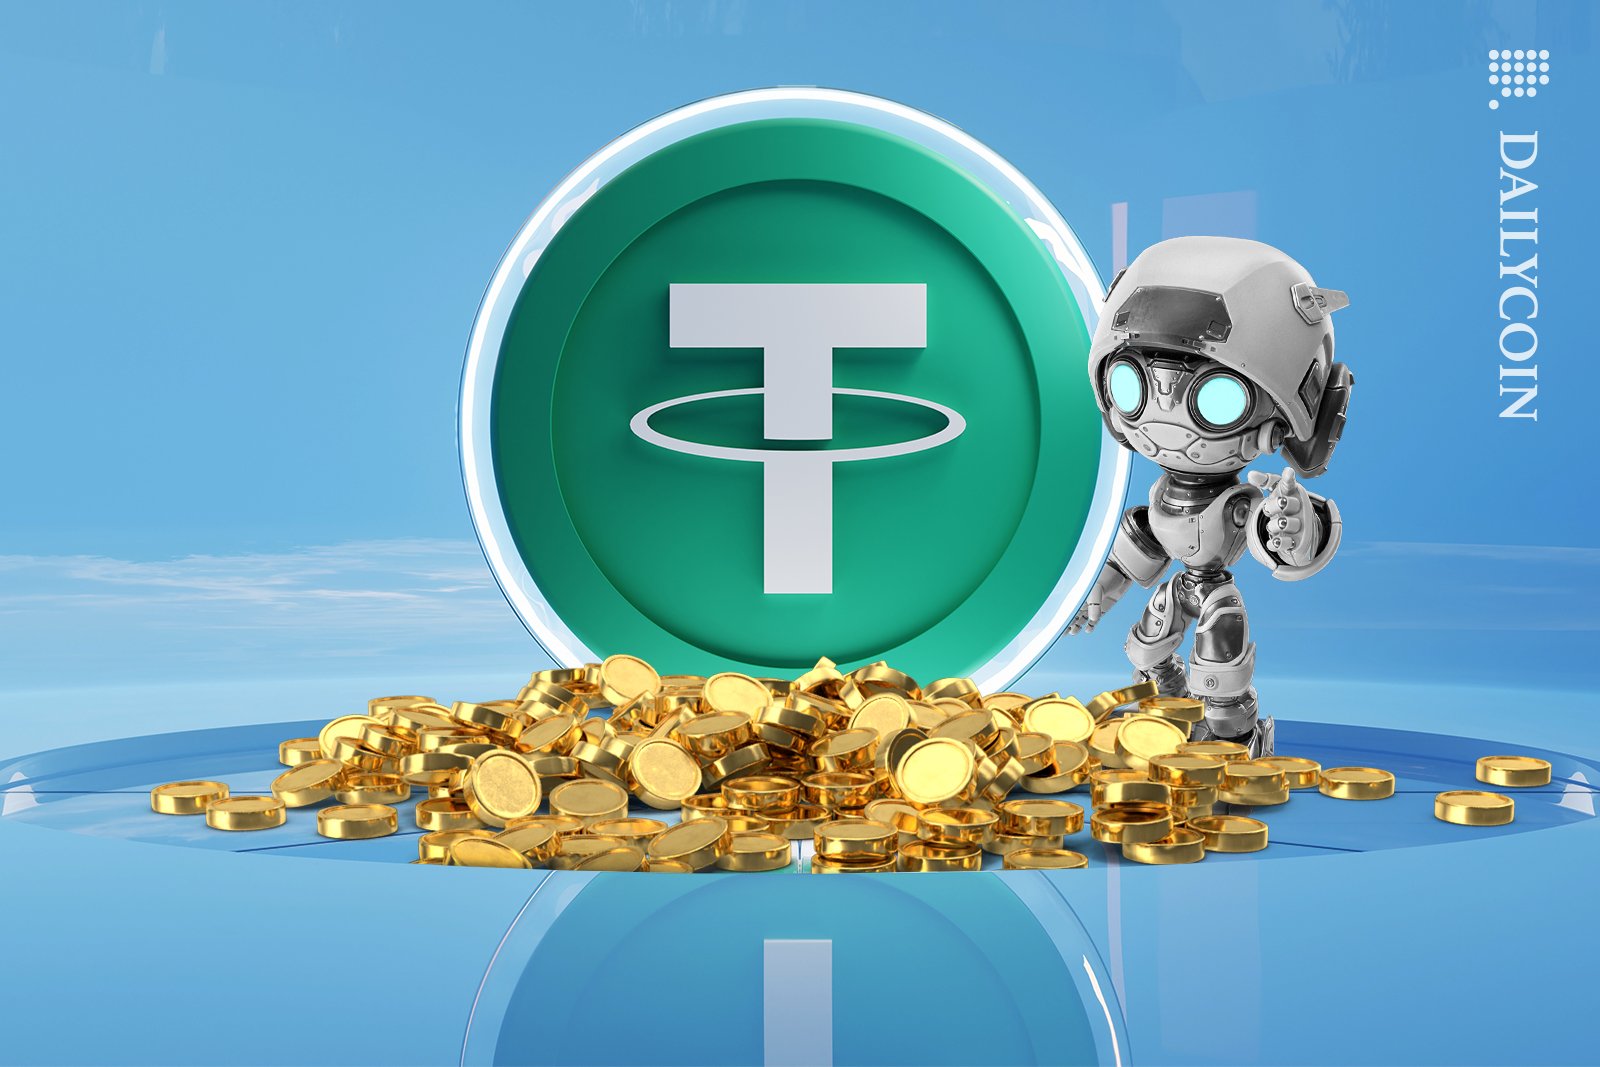 New pile of golden coins covering the Tether space.